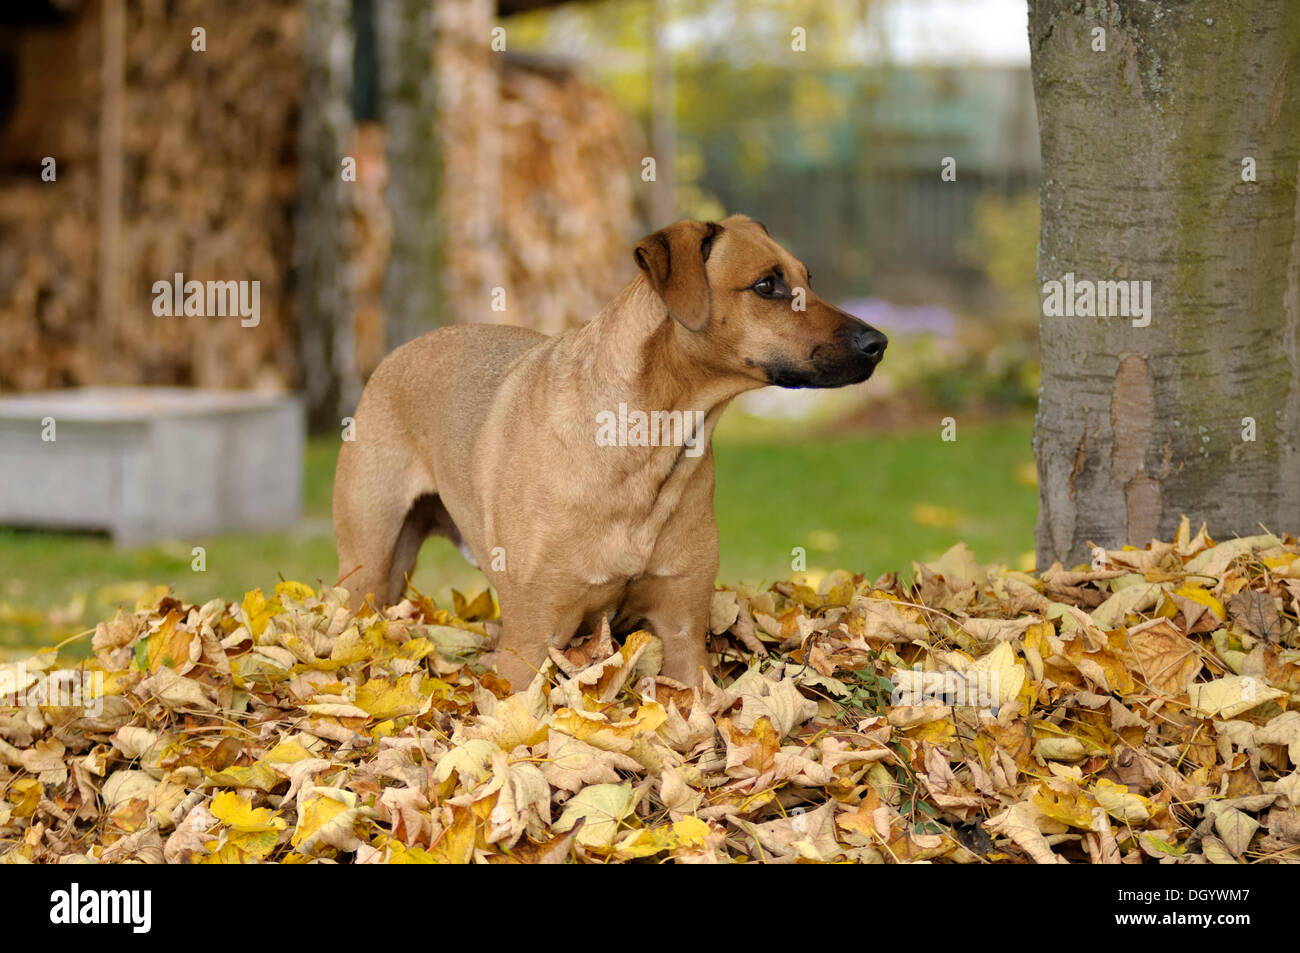 Mixed-breed Rhodesian Ridgeback standing in a pile of leaves Stock Photo